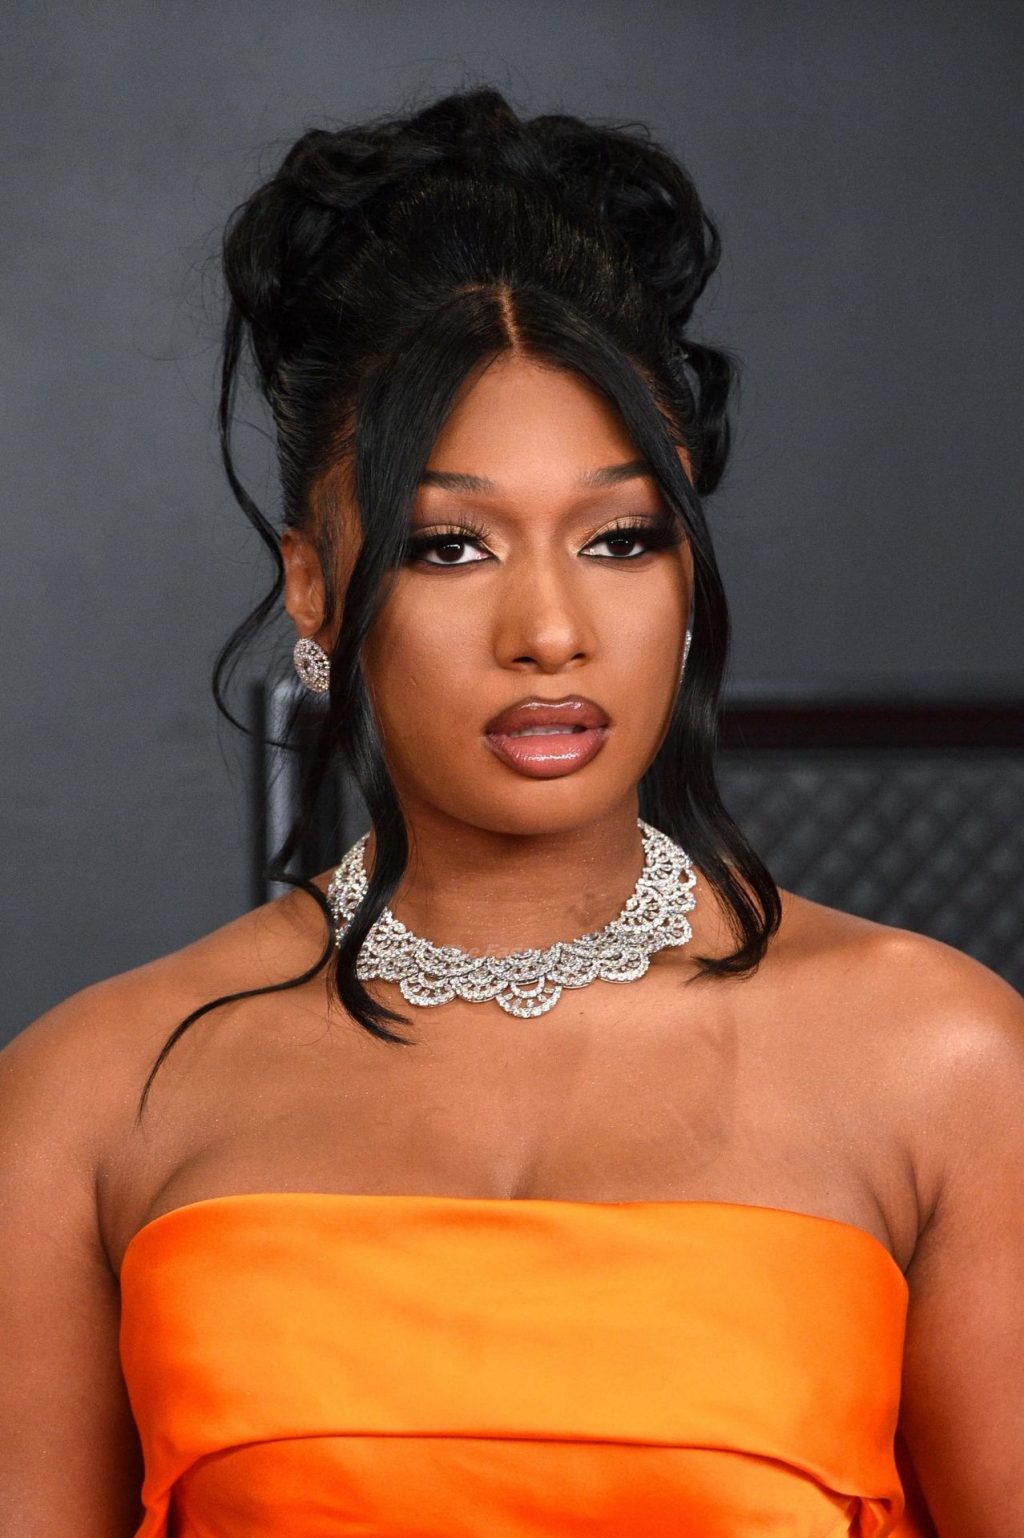 Megan Thee Stallion Displays Her Boobs, Butt and Legs at the 63rd GRAMMY Awards (49 Photos)